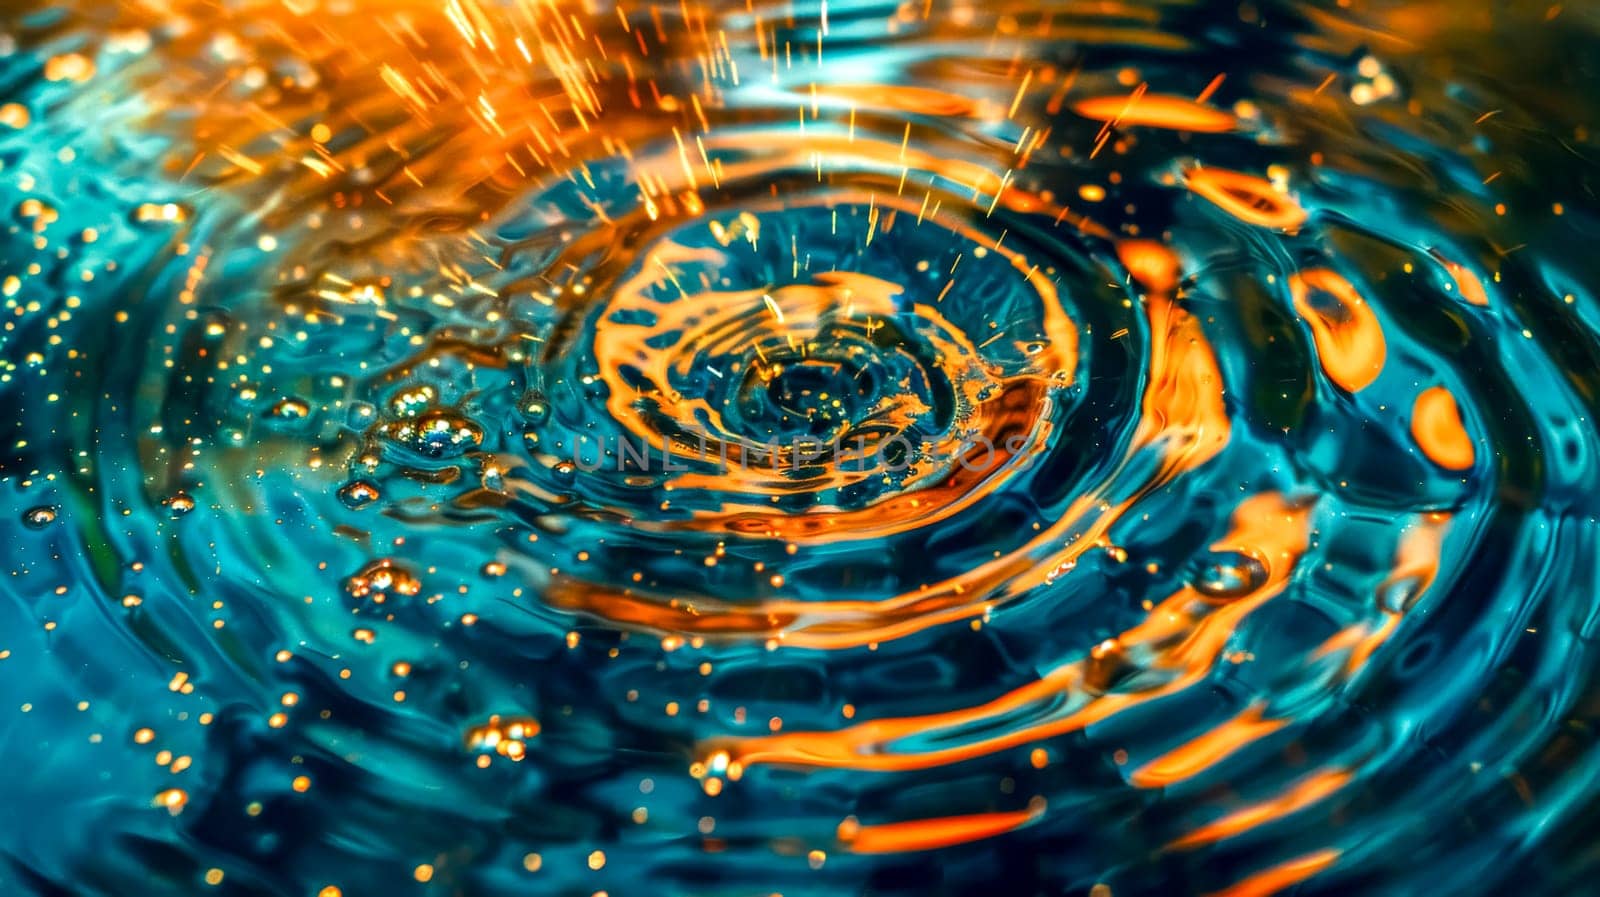 Abstract orange and blue water ripples by Edophoto